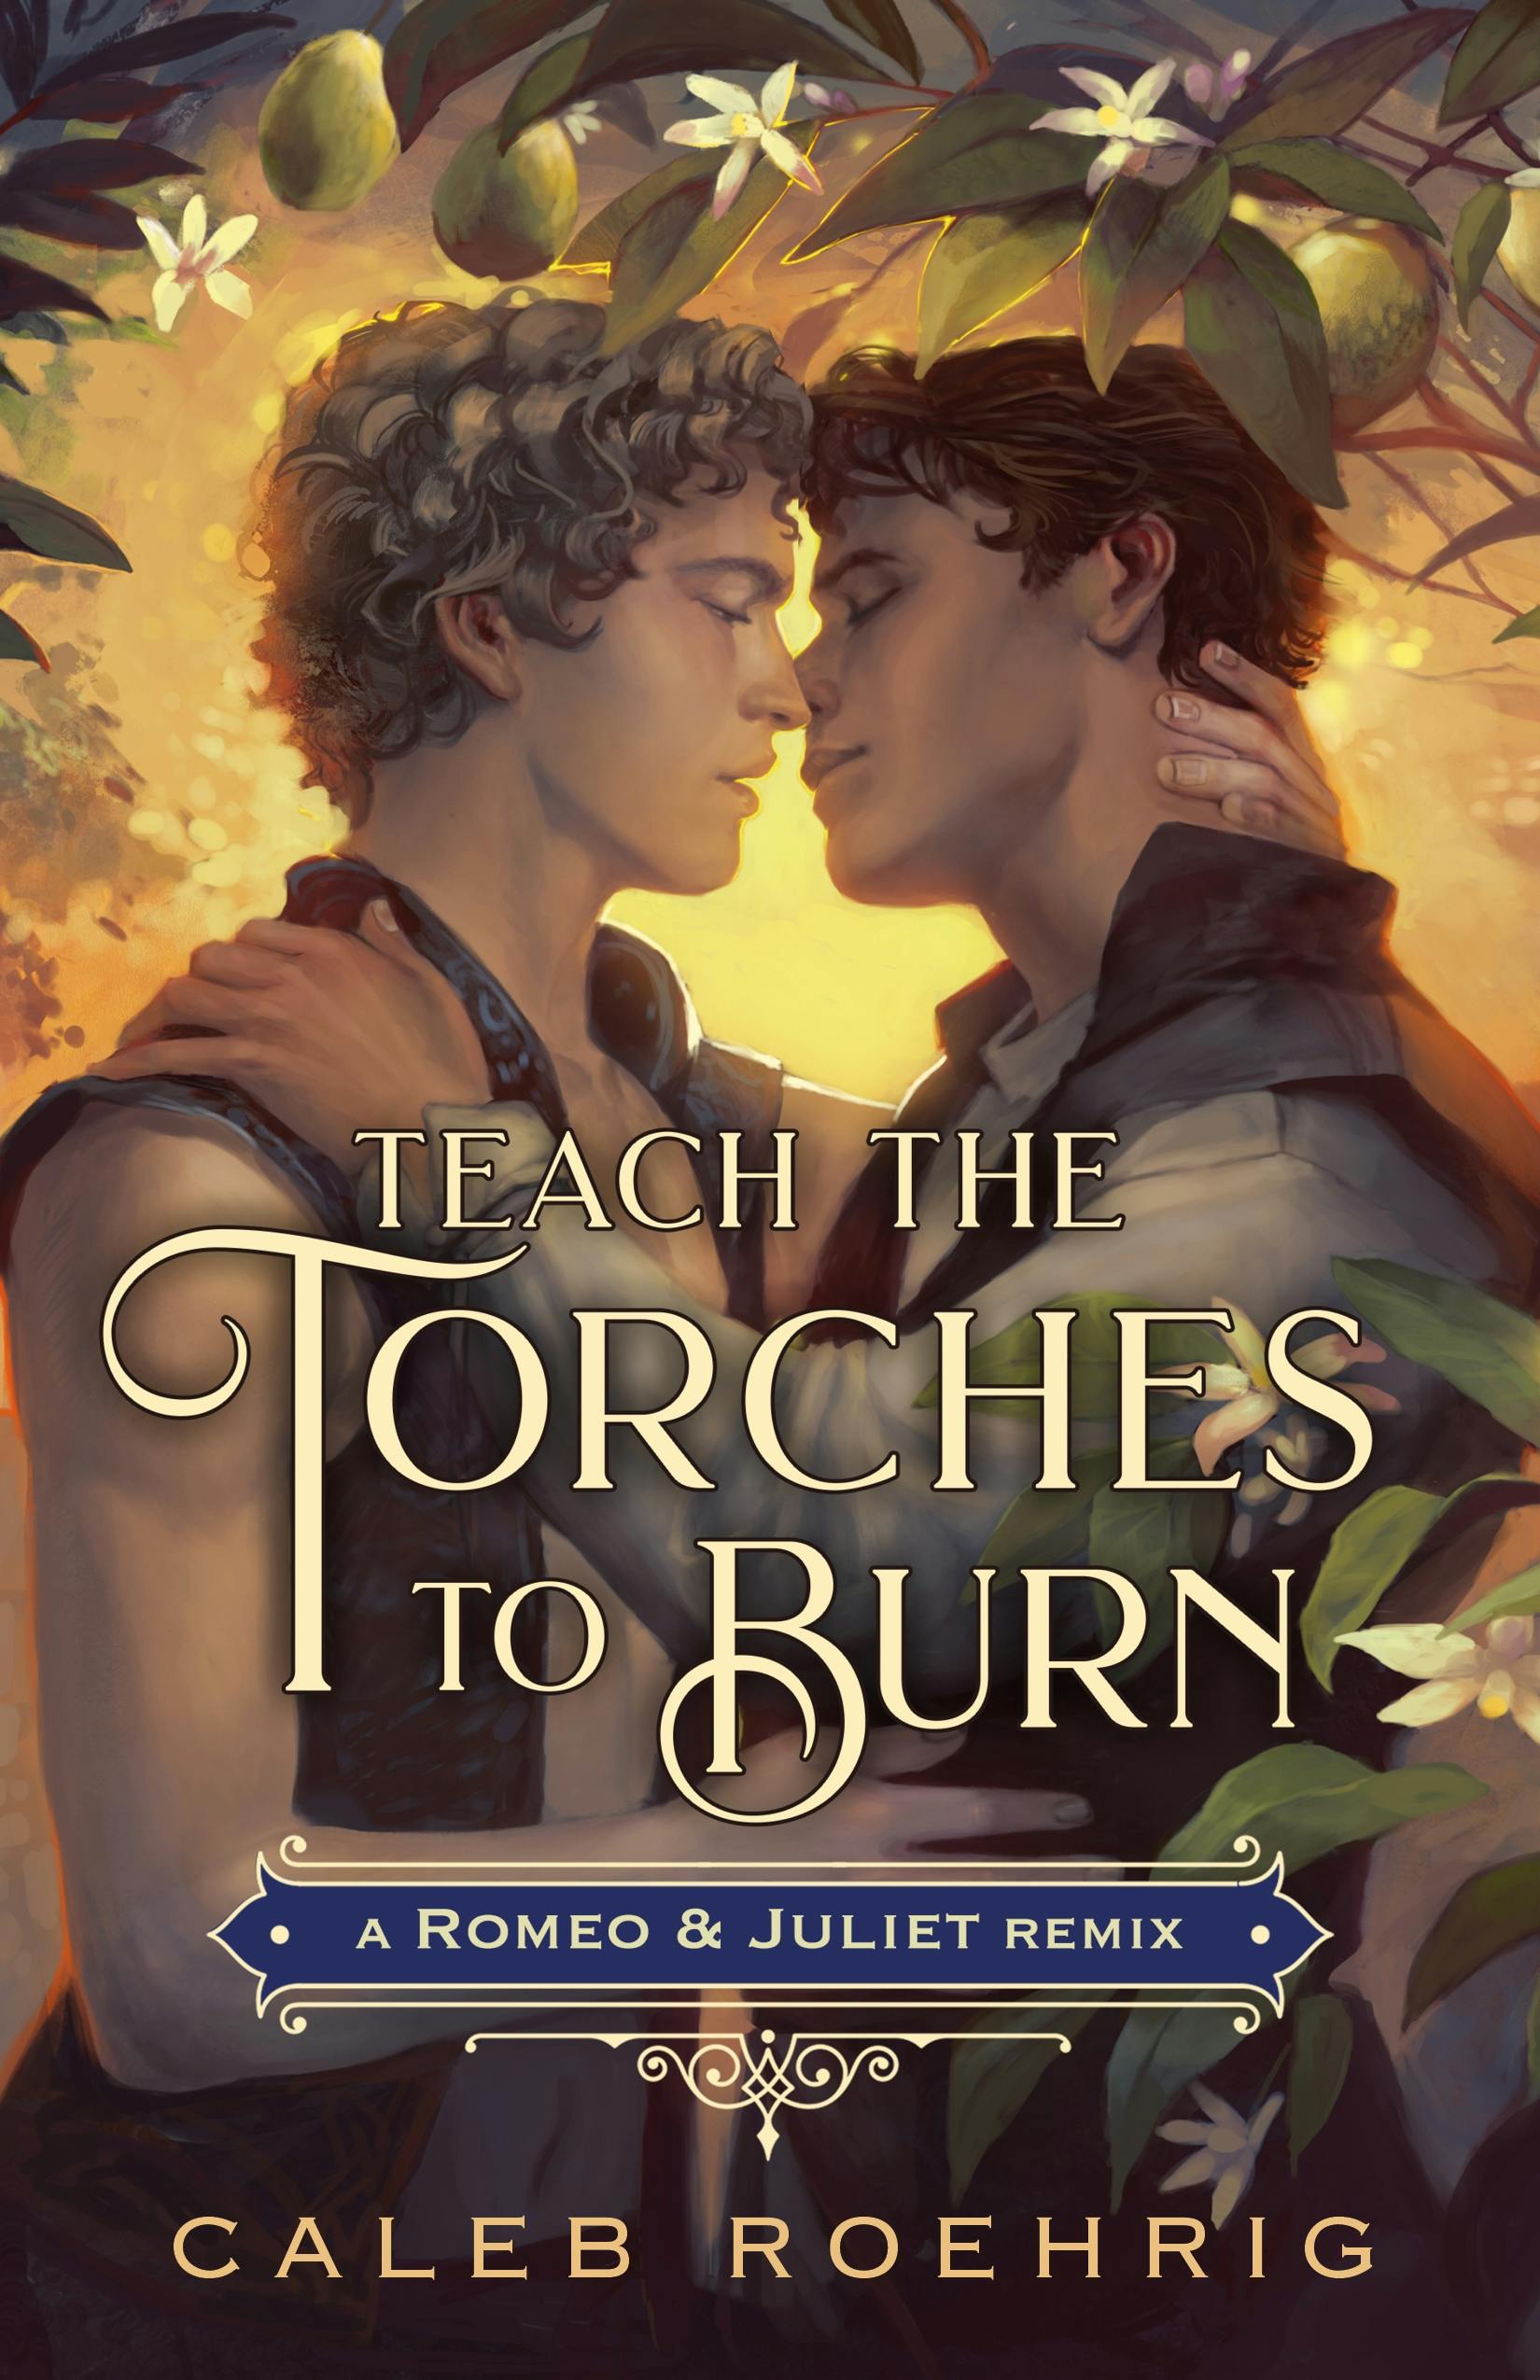 Teach the Torches to Burn A Romeo and Juliet Remix image